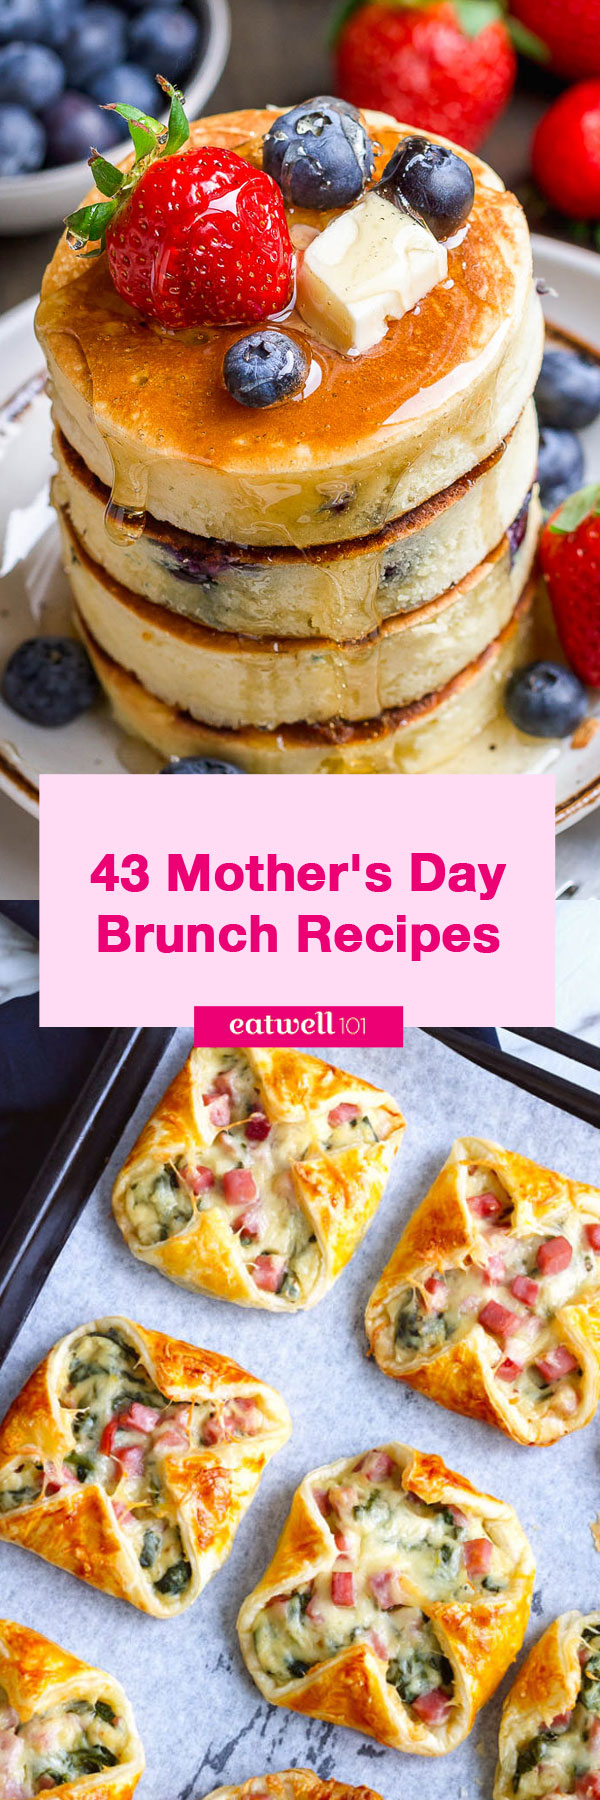 These Mother's Day brunch recipe ideas are easy and delicious enough to make her feel as special as she truly is.